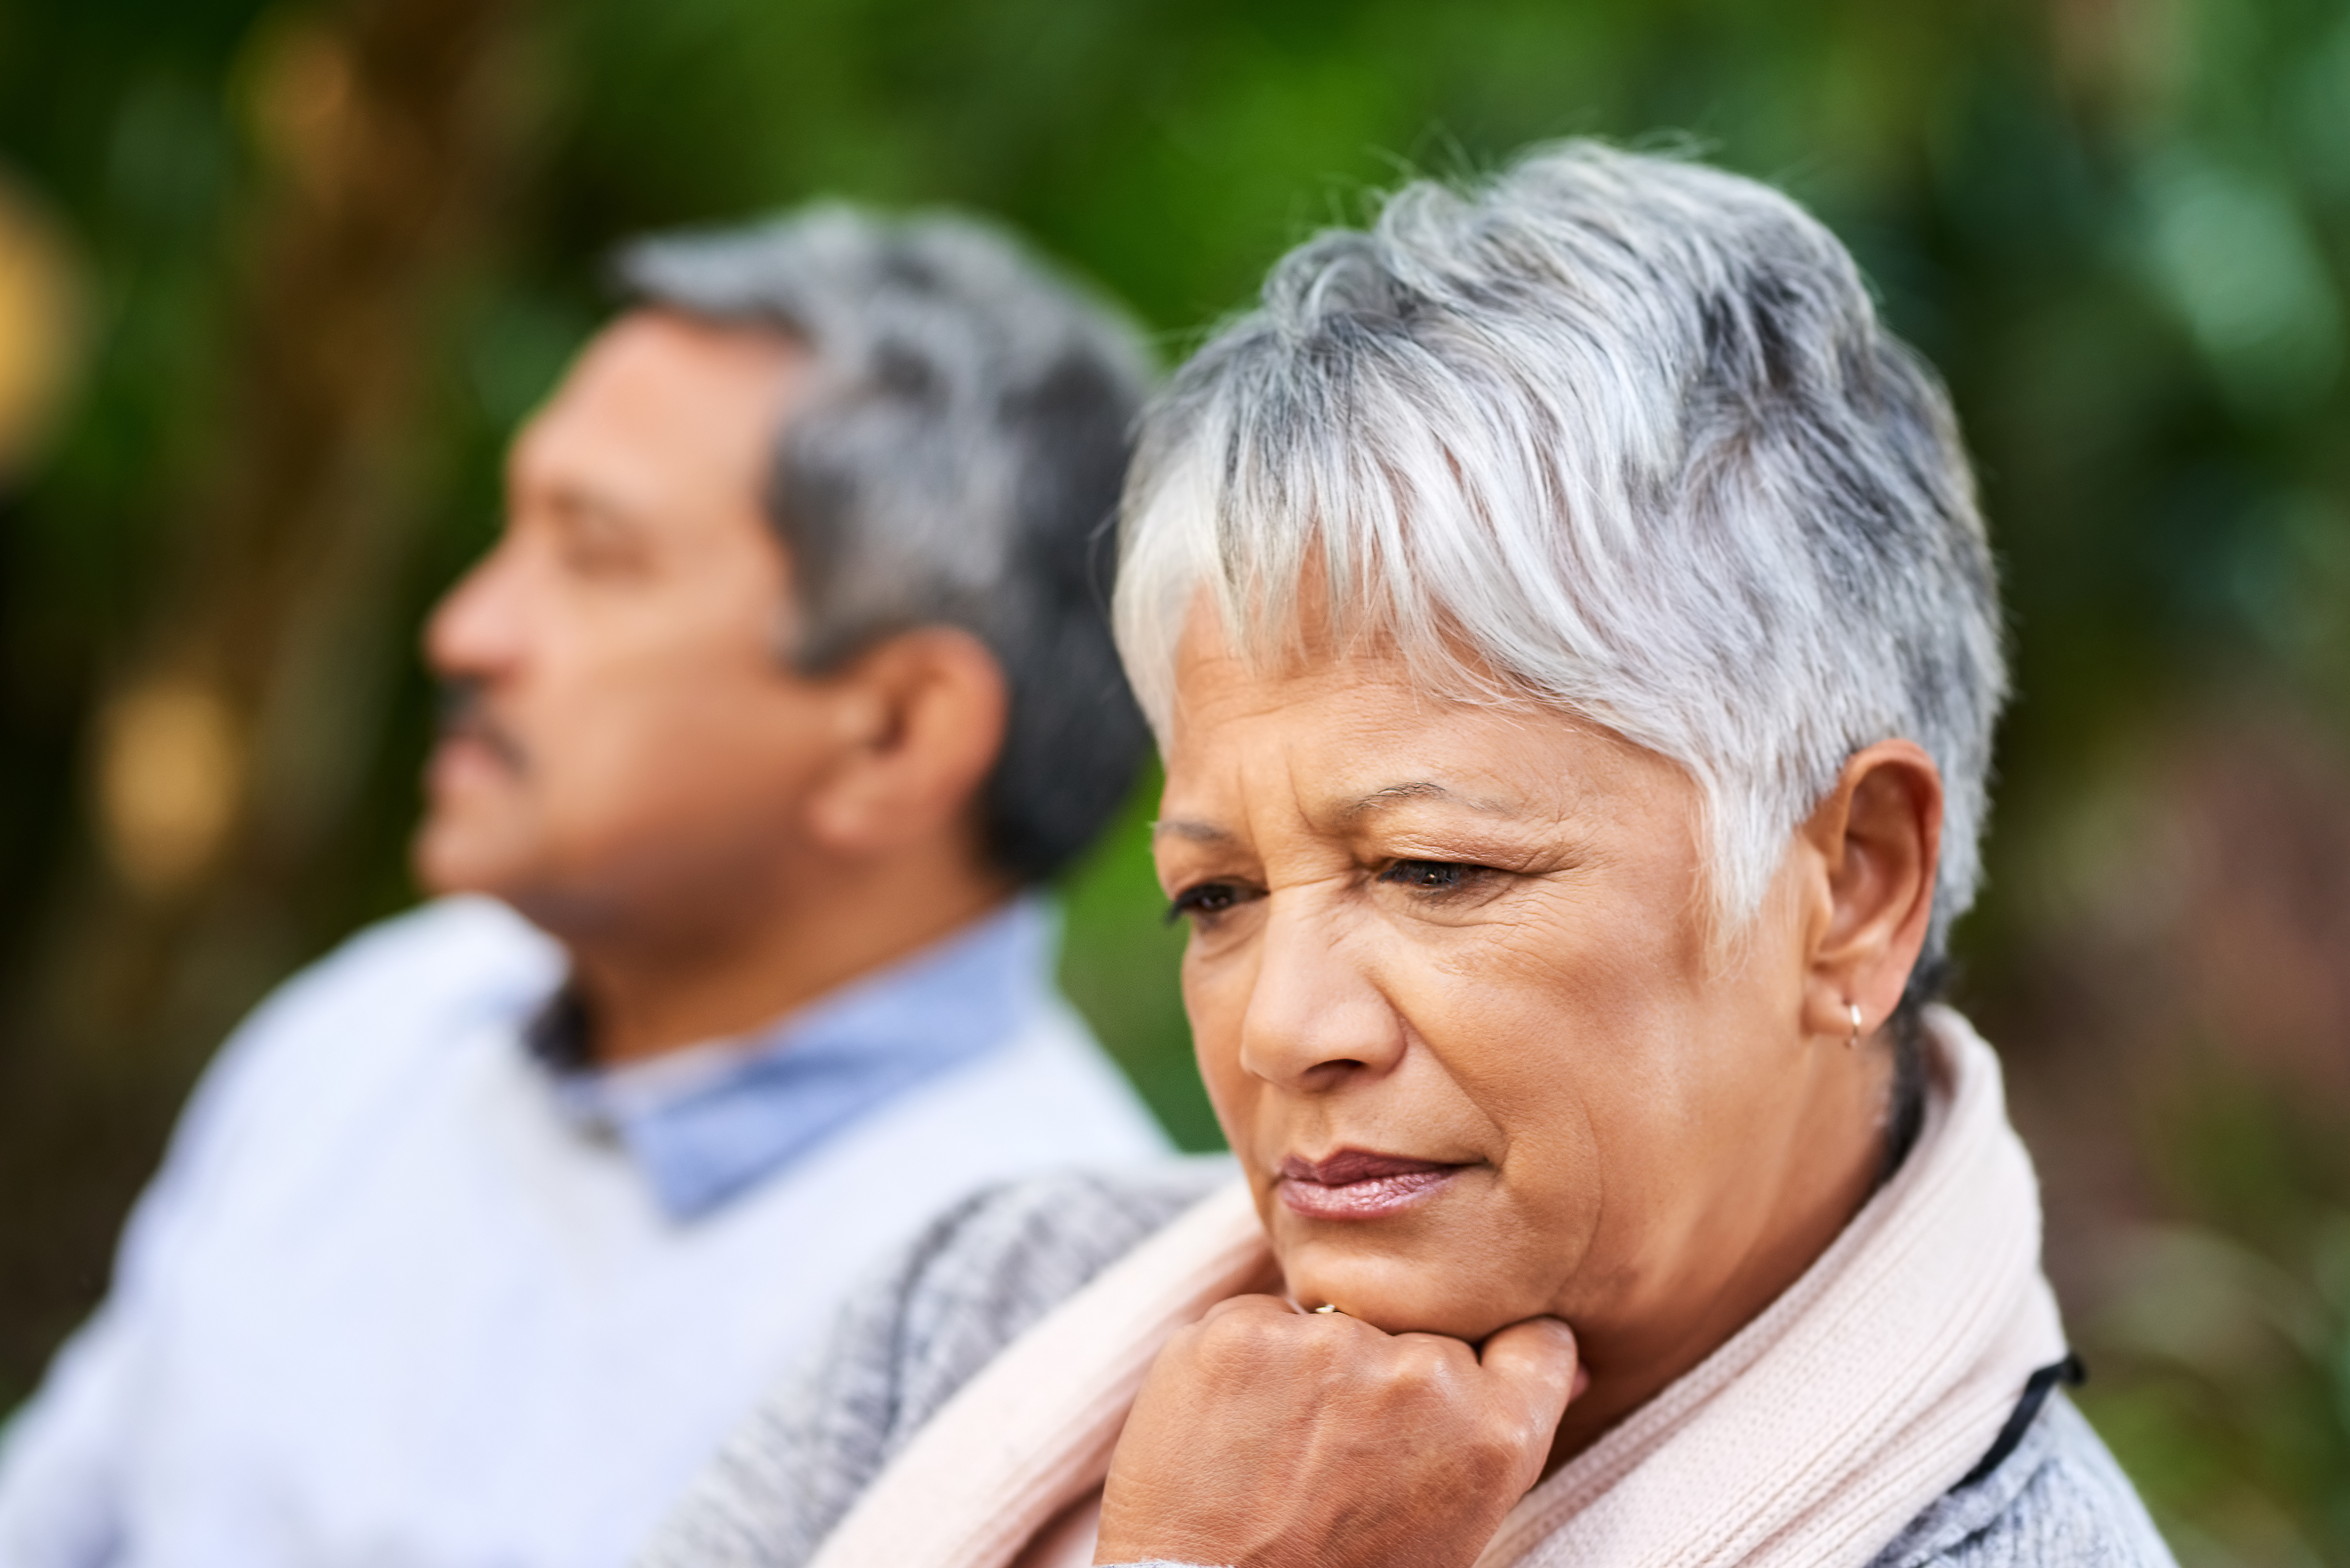 An upset older woman looking to the side while a man sits closeby | Source: Getty Images